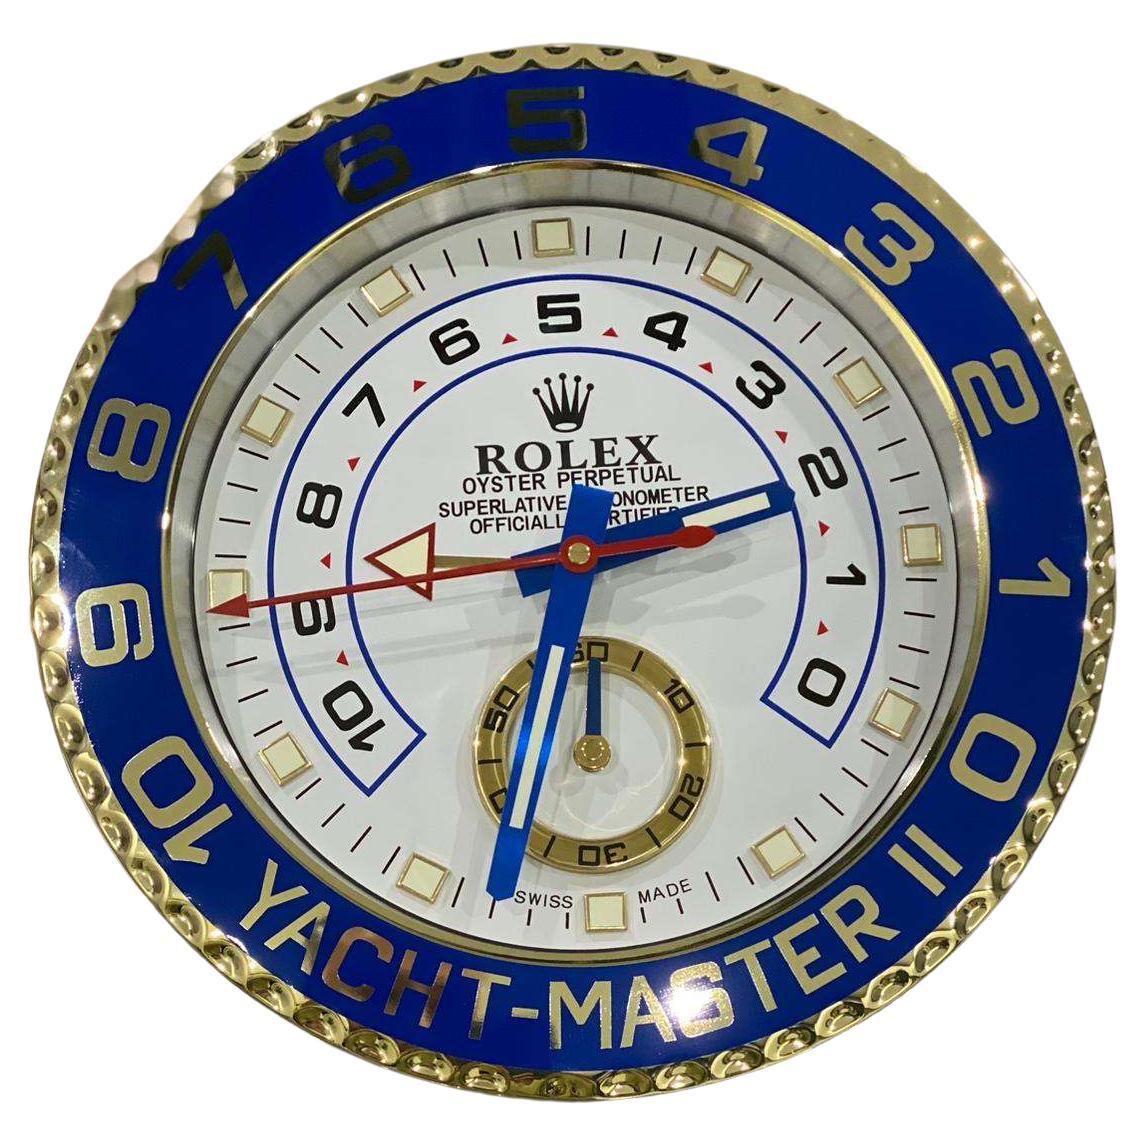 ROLEX Officially Certified Chrome Gold and Blue Yacht Master II Wall Clock